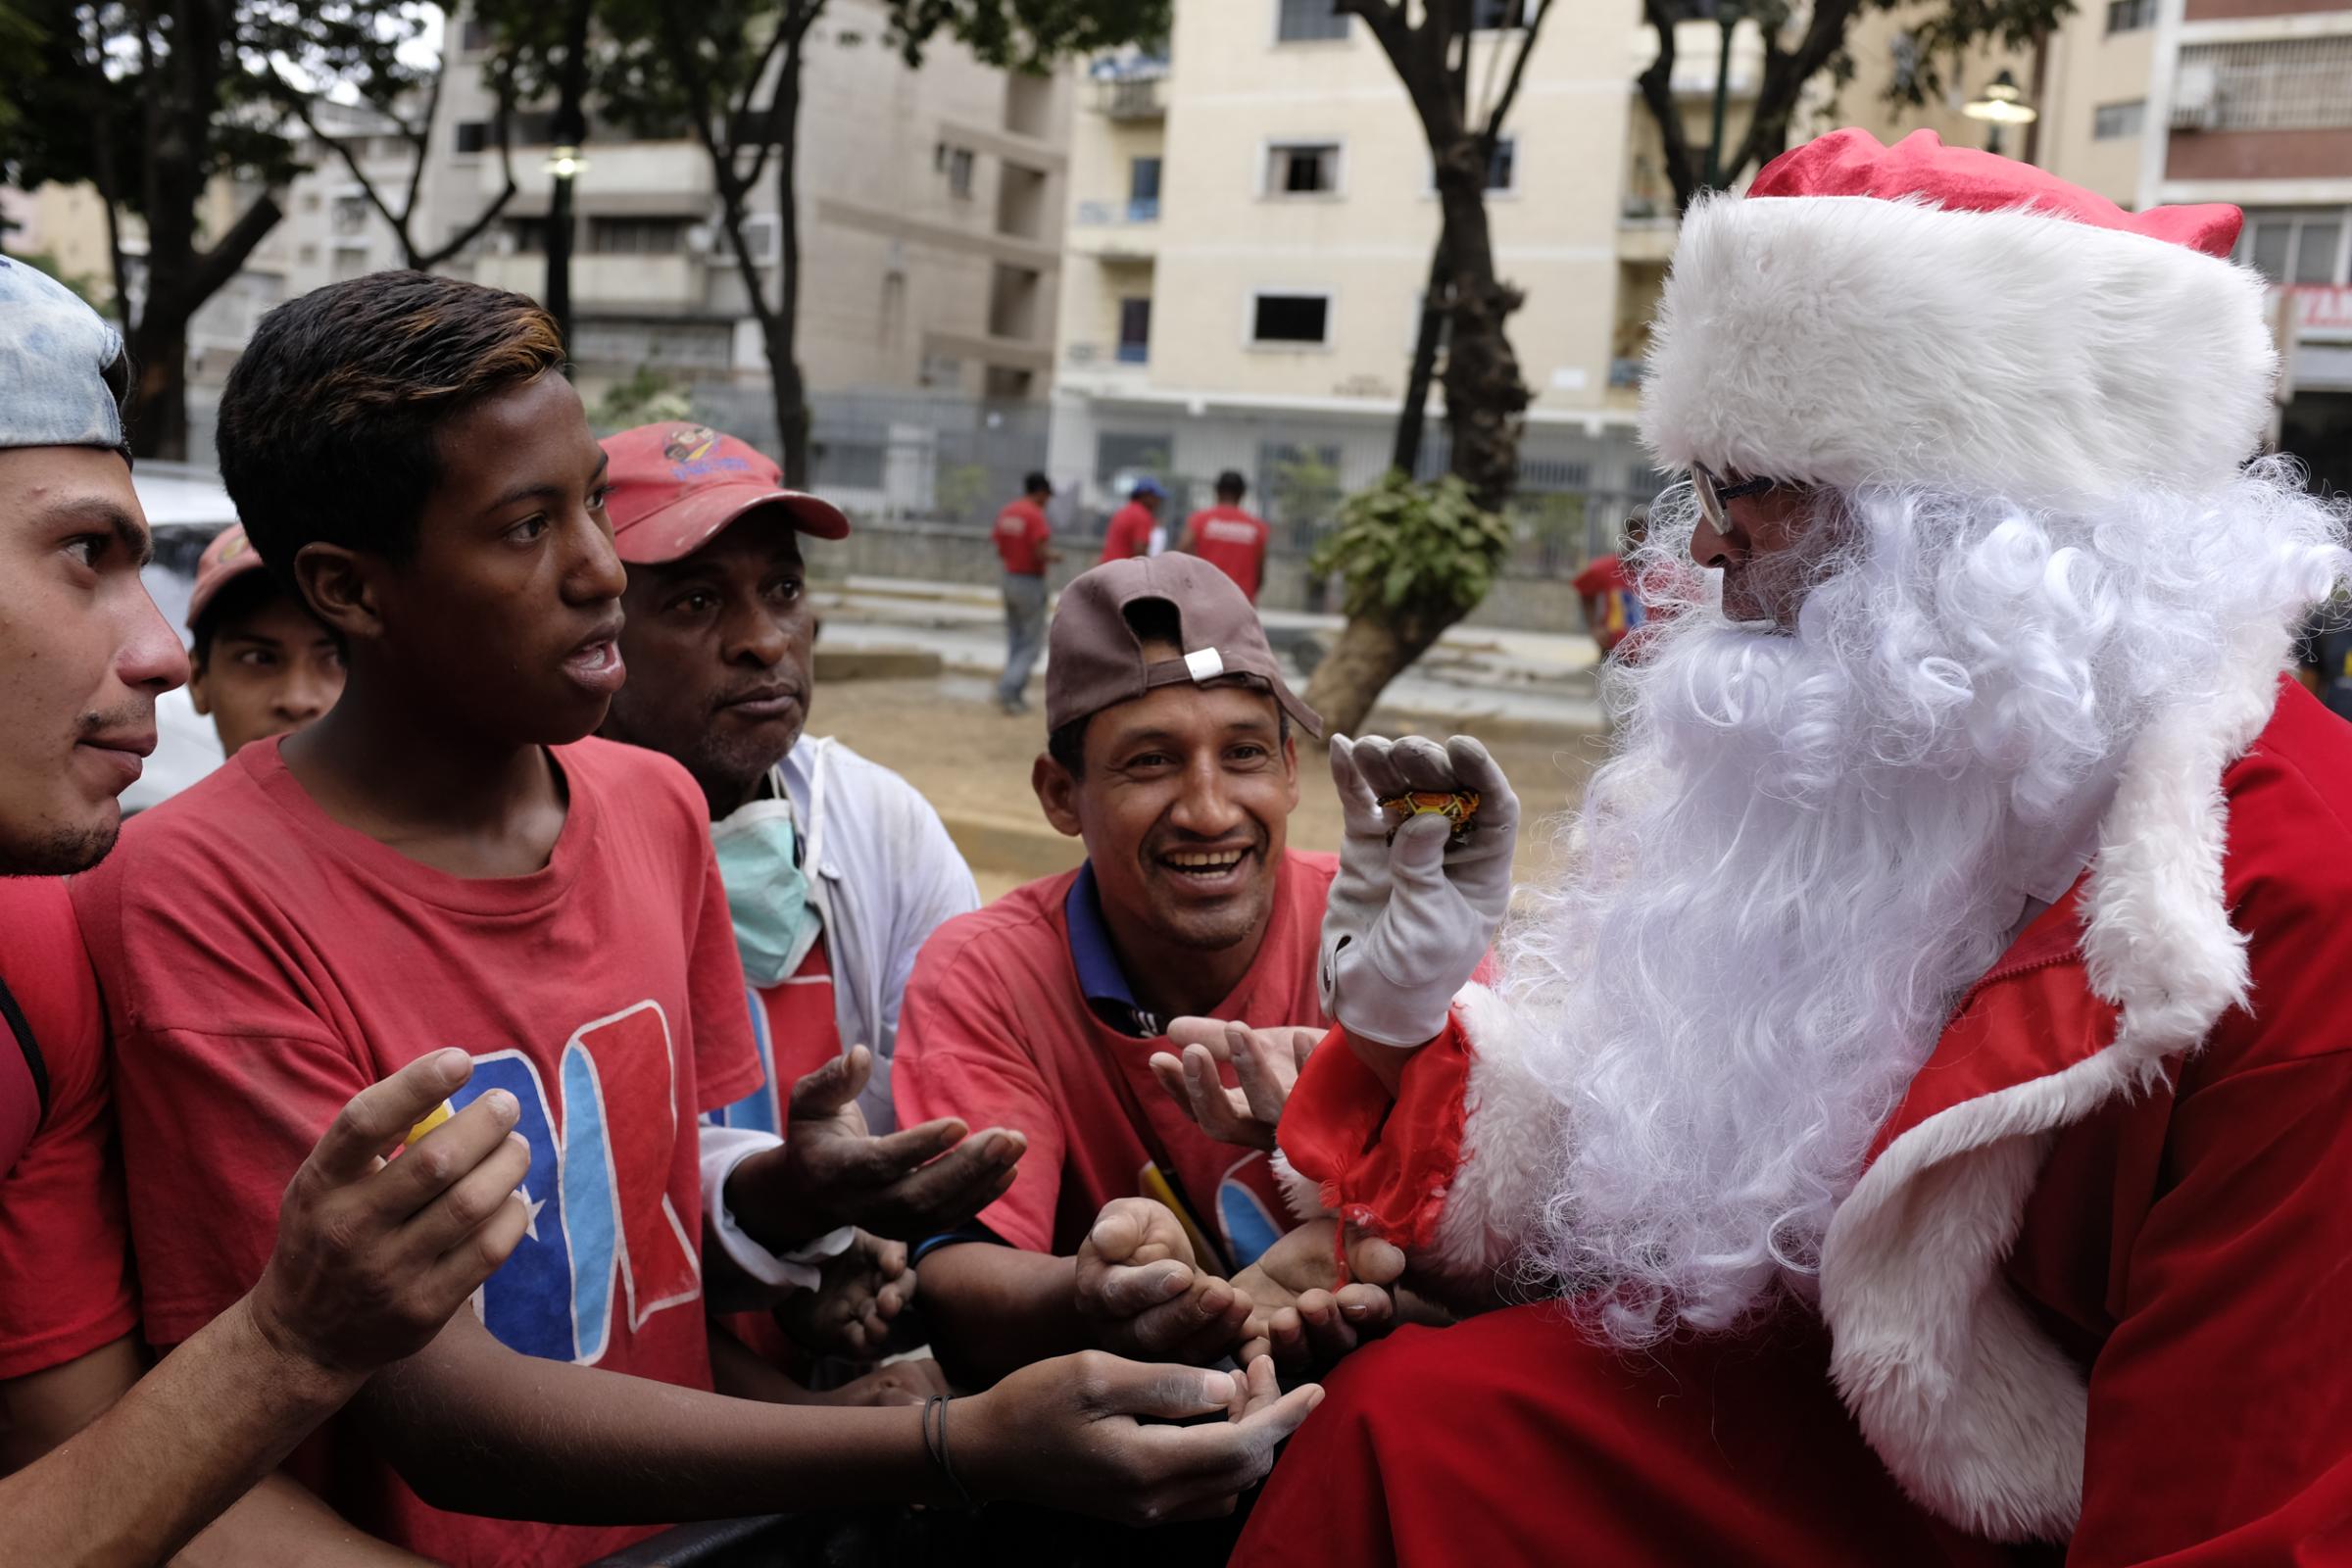 slideshow - Richard Gamboa, dressed up as Santa Claus, handouts candies to workers during the event...